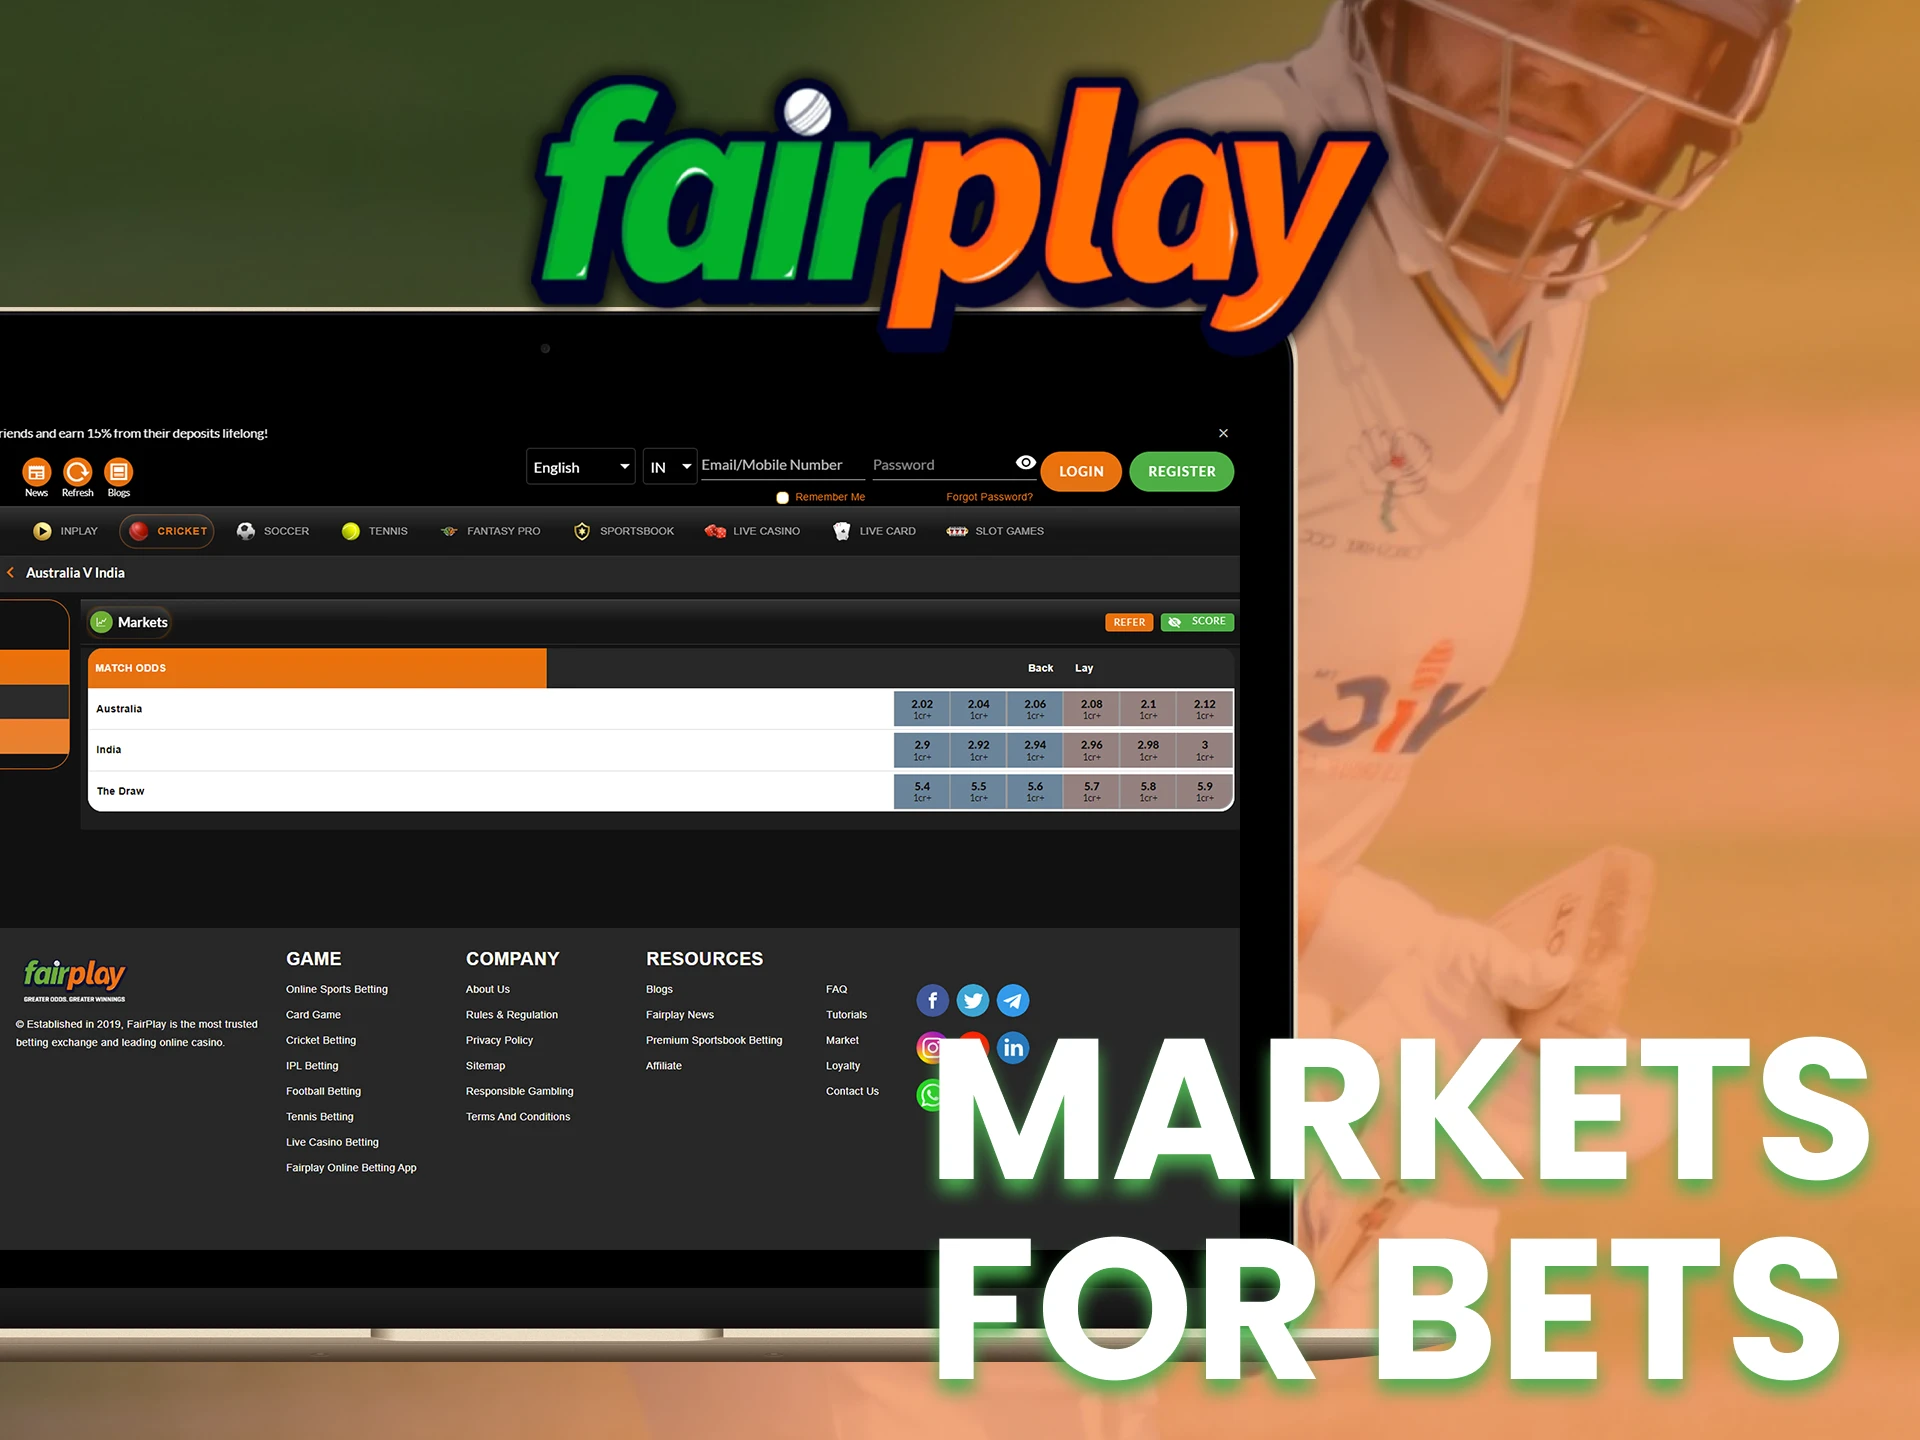 Learn more about market for bets at the Fairplay.